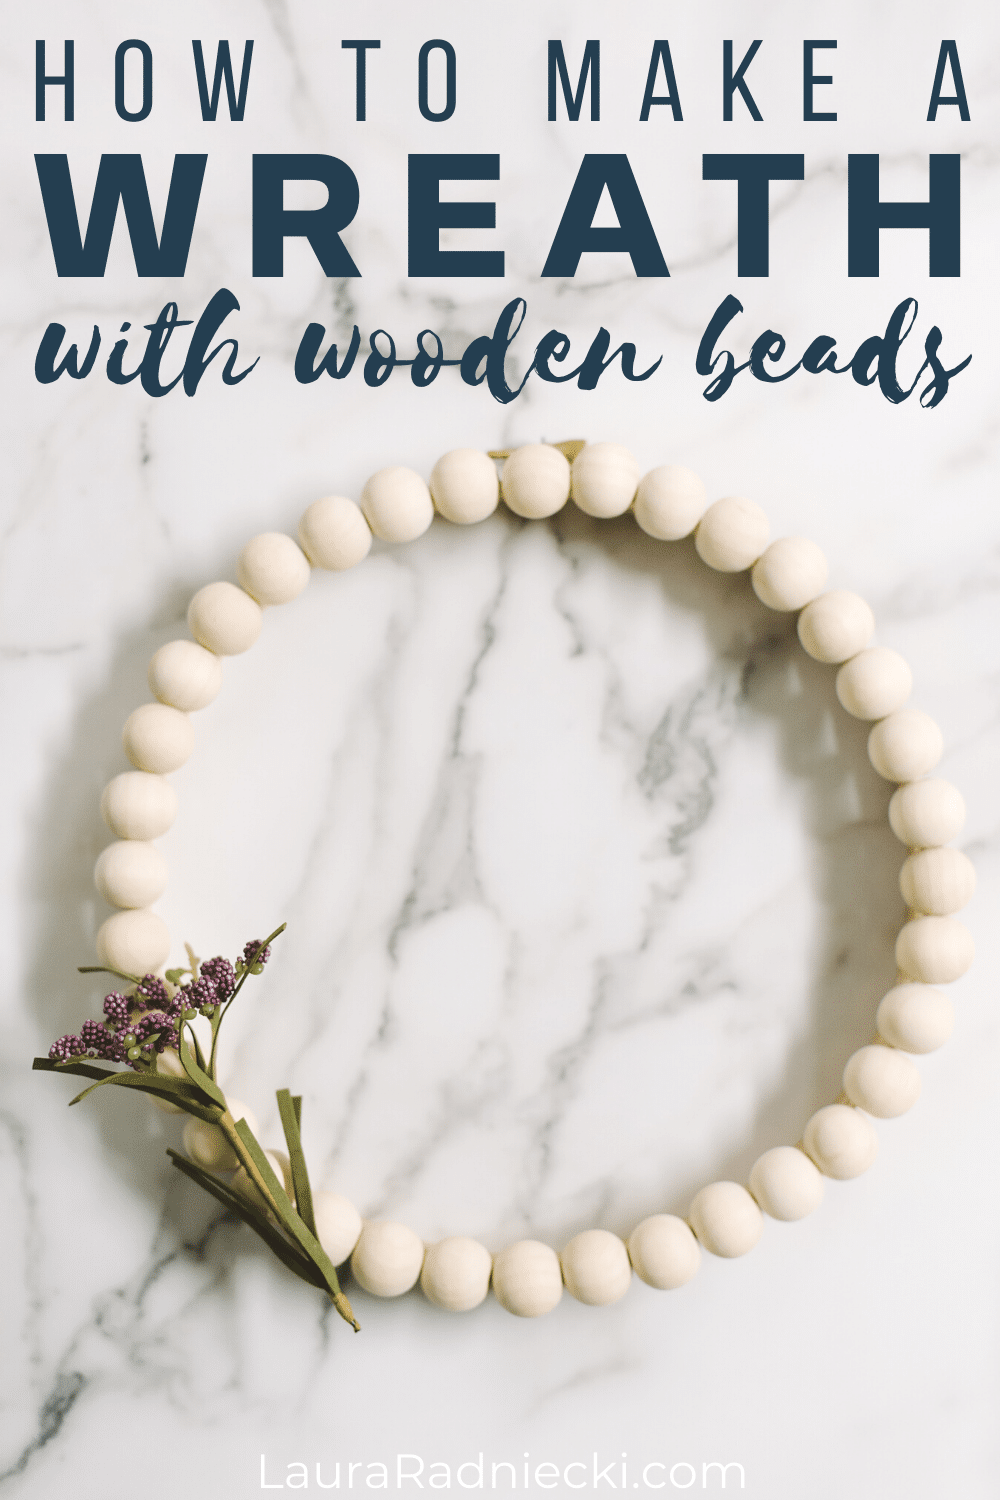 How to Make a Wreath with Wooden Beads